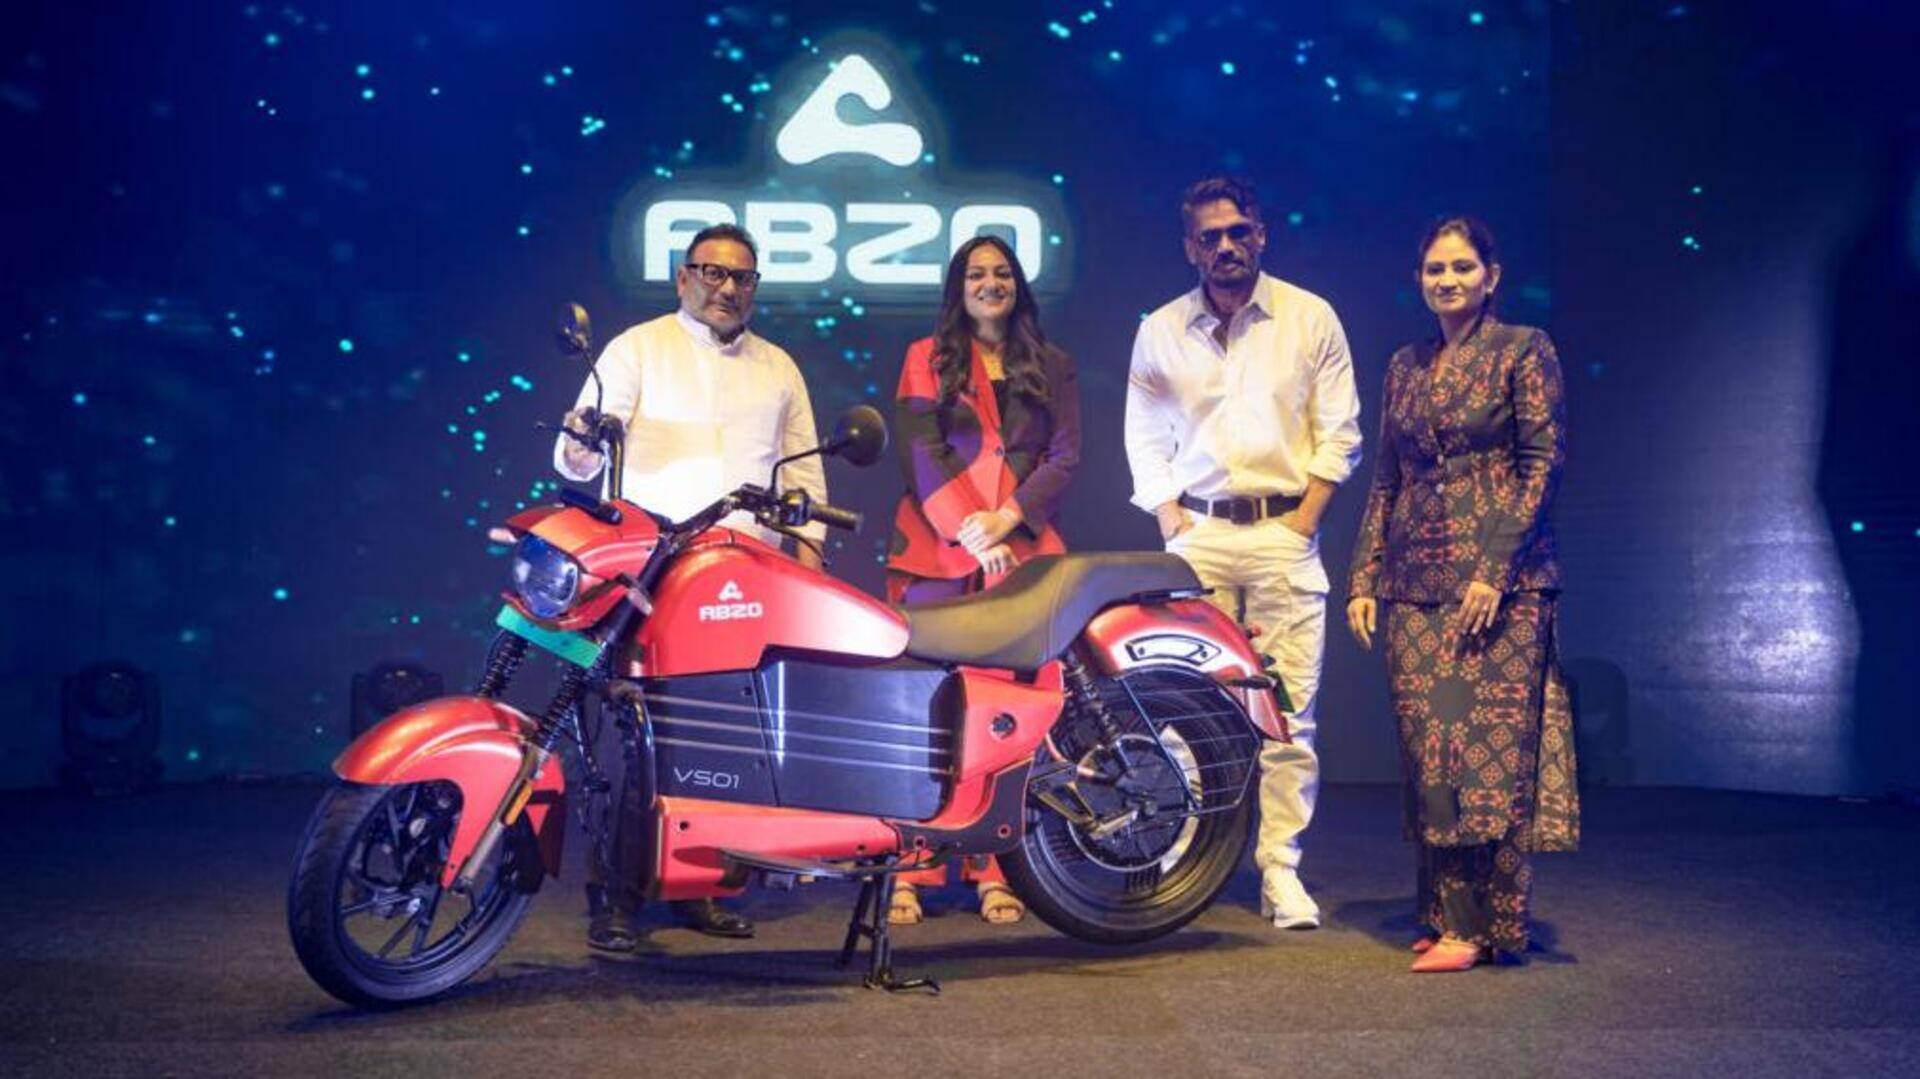 ABZO Motors introduces VS01 electric motorcycle at Rs. 1.8 lakh